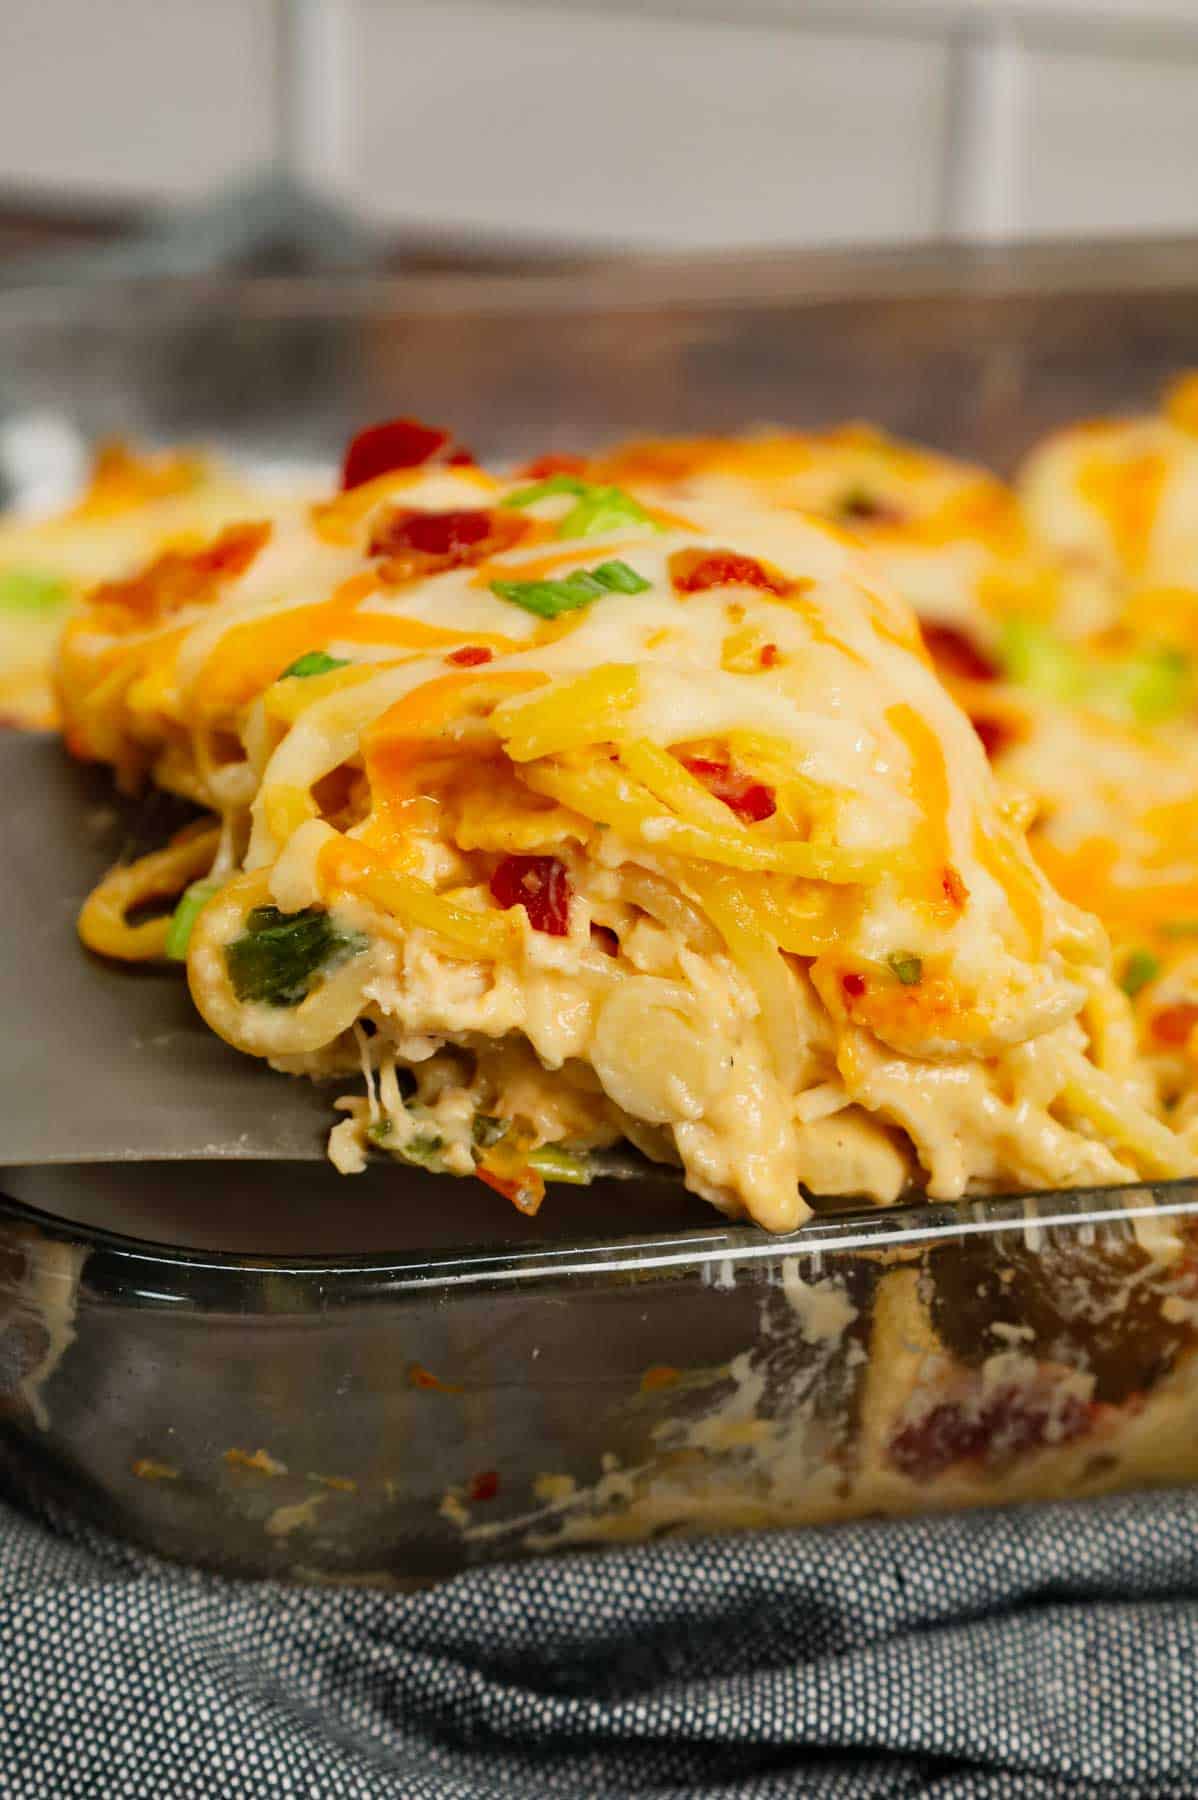 Crack Chicken Spaghetti is a delicious baked pasta recipe with a creamy sauce and loaded with shredded chicken, crumbled bacon, chopped green onions, ranch dressing mix and shredded cheddar and mozzarella cheese.